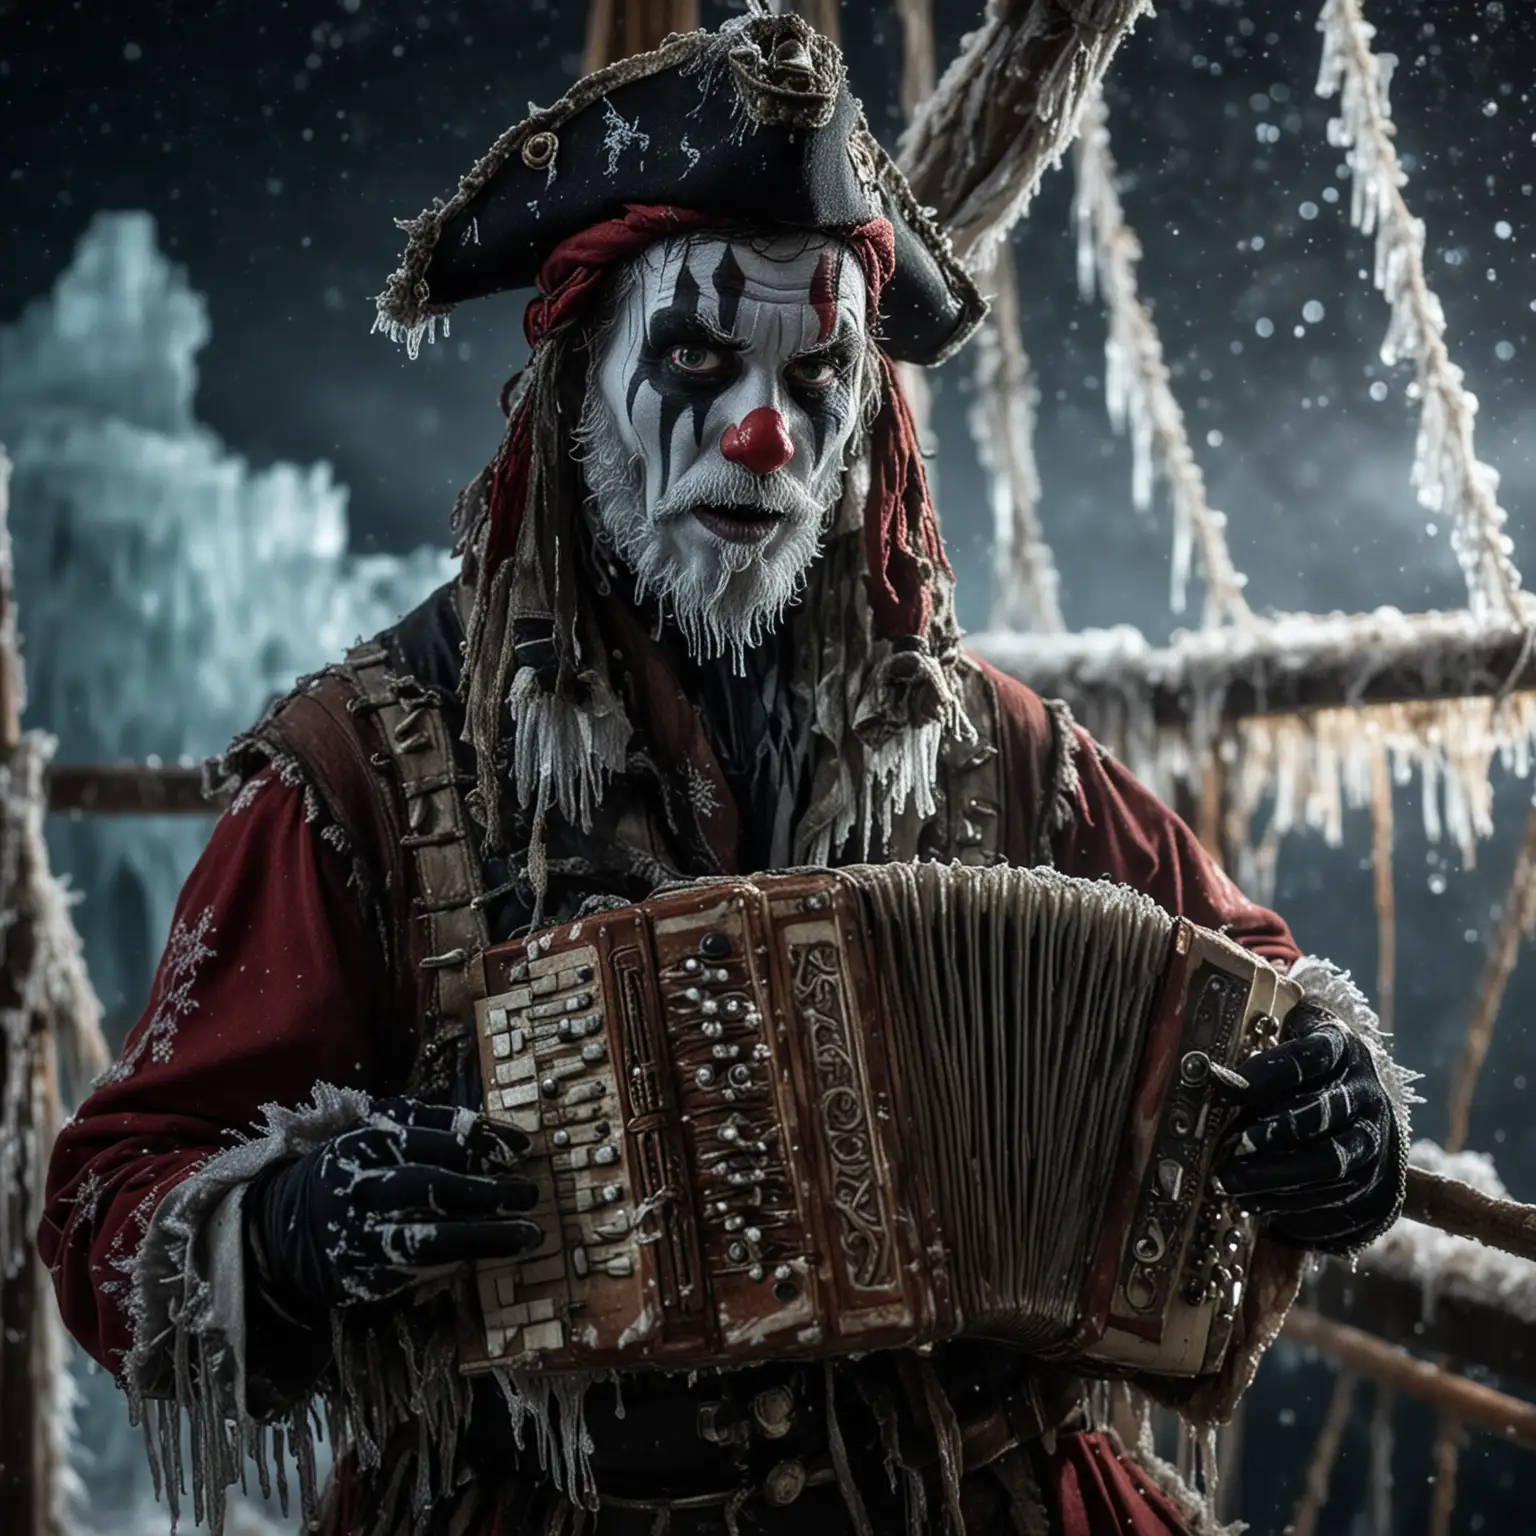 Frozen Harlequin Playing Accordion on Pirate Ship at Night